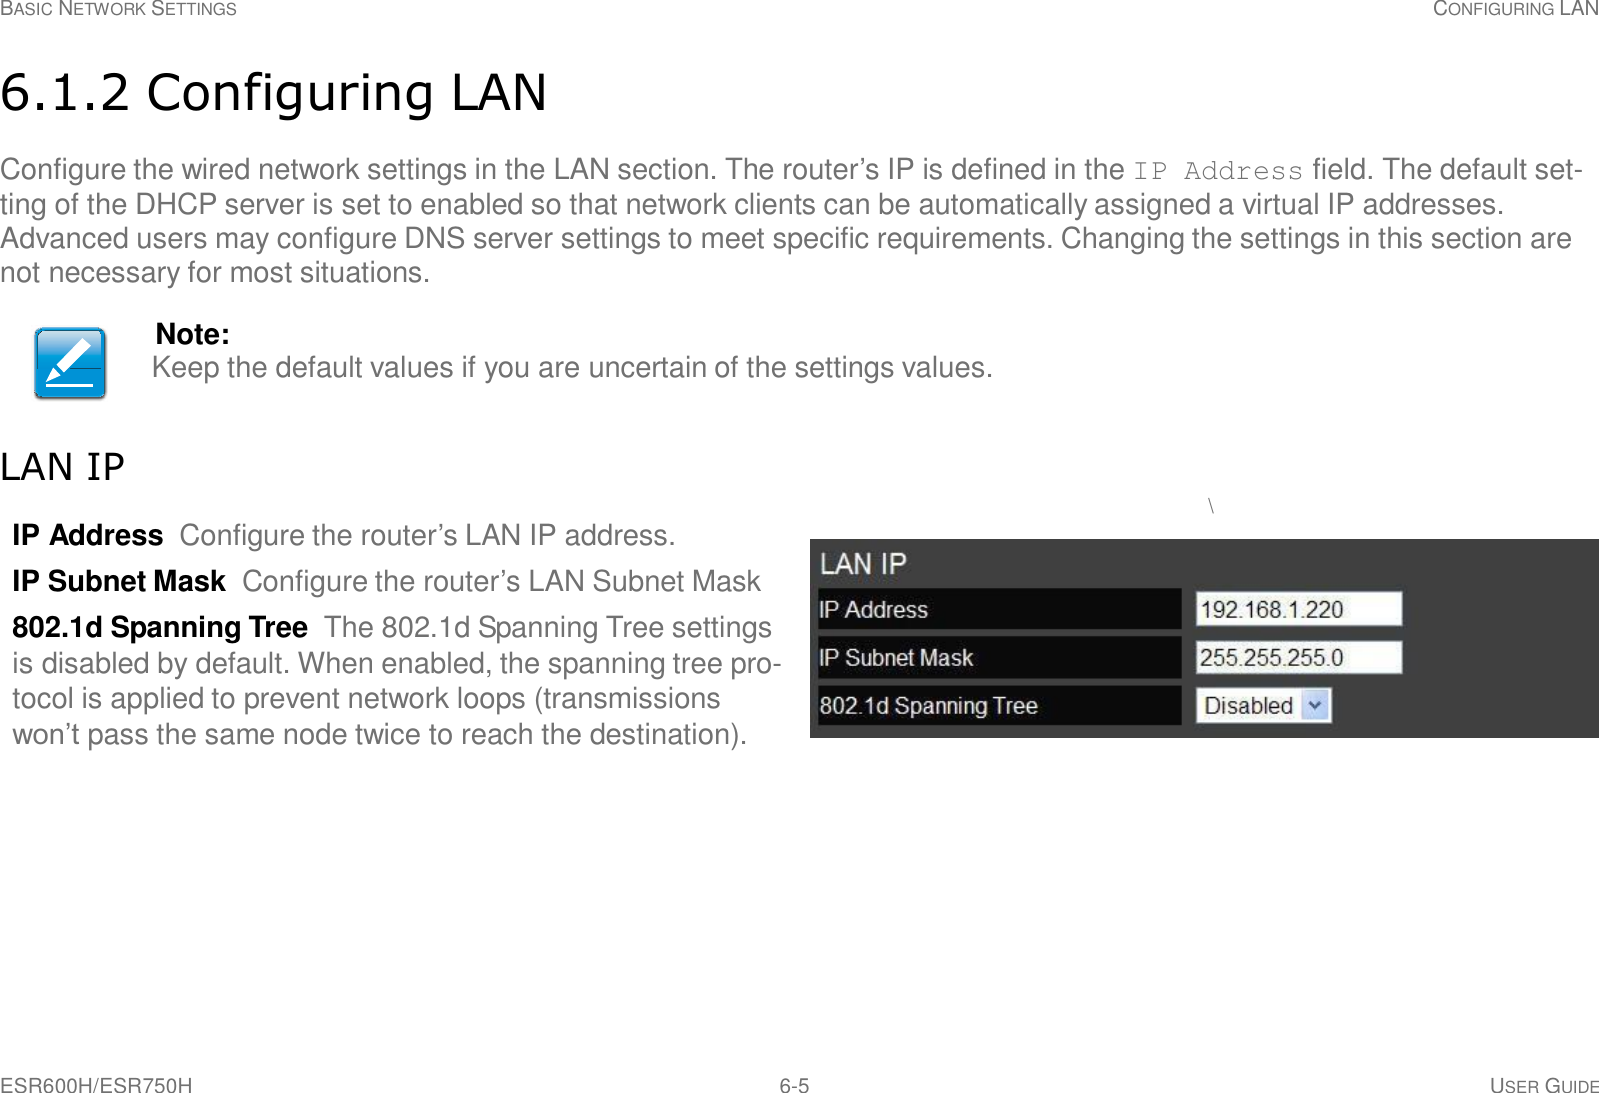 ESR600H/ESR750H 6-5 USER GUIDE BASIC NETWORK SETTINGS CONFIGURING LAN     6.1.2 Configuring LAN  Configure the wired network settings in the LAN section. The router’s IP is defined in the IP Address field. The default set- ting of the DHCP server is set to enabled so that network clients can be automatically assigned a virtual IP addresses. Advanced users may configure DNS server settings to meet specific requirements. Changing the settings in this section are not necessary for most situations.  Note: Keep the default values if you are uncertain of the settings values.    LAN IP \ IP Address Configure the router’s LAN IP address.  IP Subnet Mask Configure the router’s LAN Subnet Mask  802.1d Spanning Tree The 802.1d Spanning Tree settings is disabled by default. When enabled, the spanning tree pro- tocol is applied to prevent network loops (transmissions won’t pass the same node twice to reach the destination). 